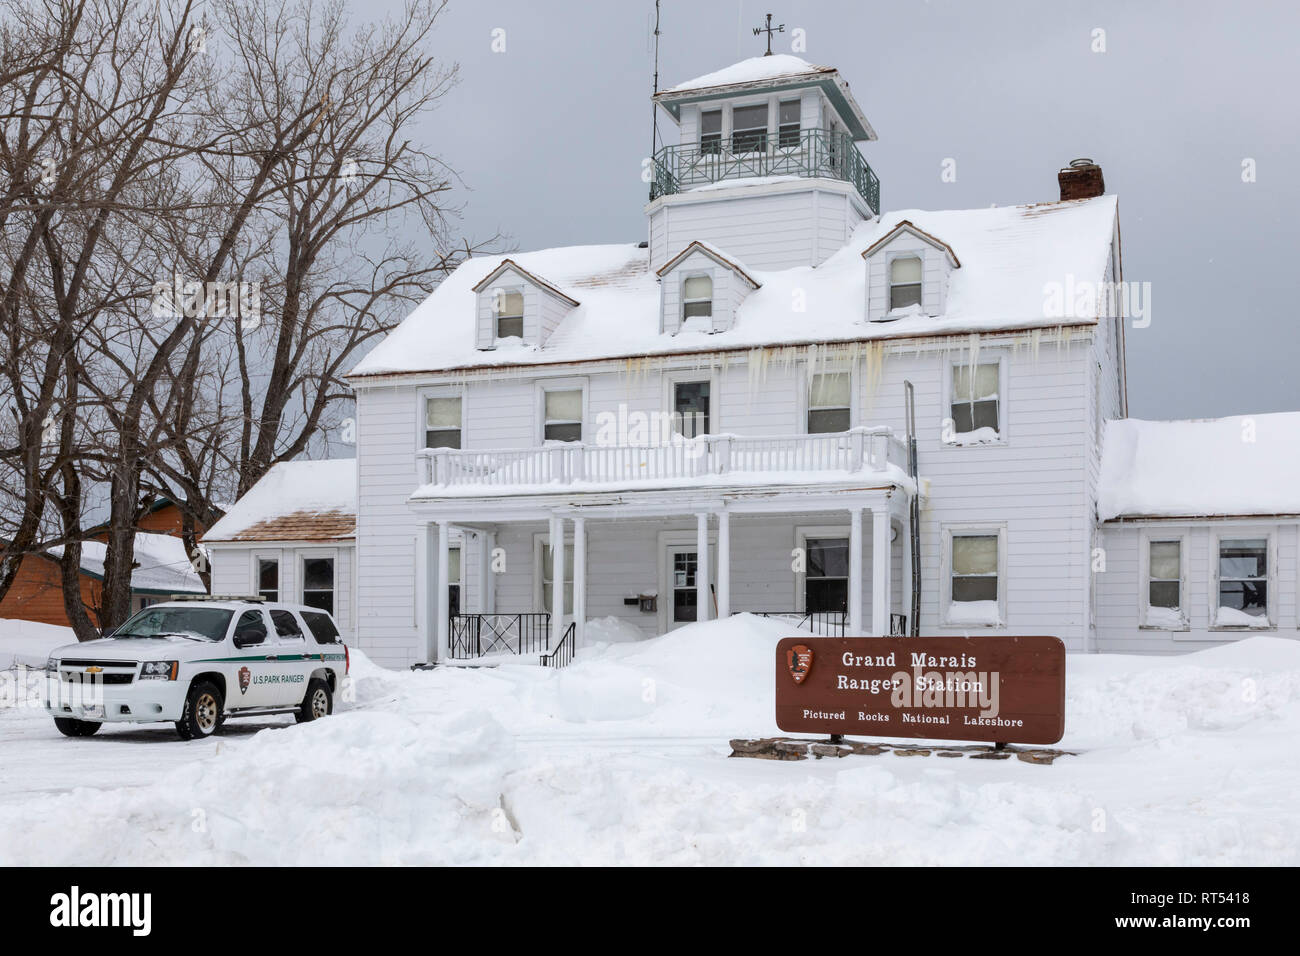 Grand Marais, Michigan - The National Park Service's ranger station for Pictured Rocks National Lakeshore. Stock Photo